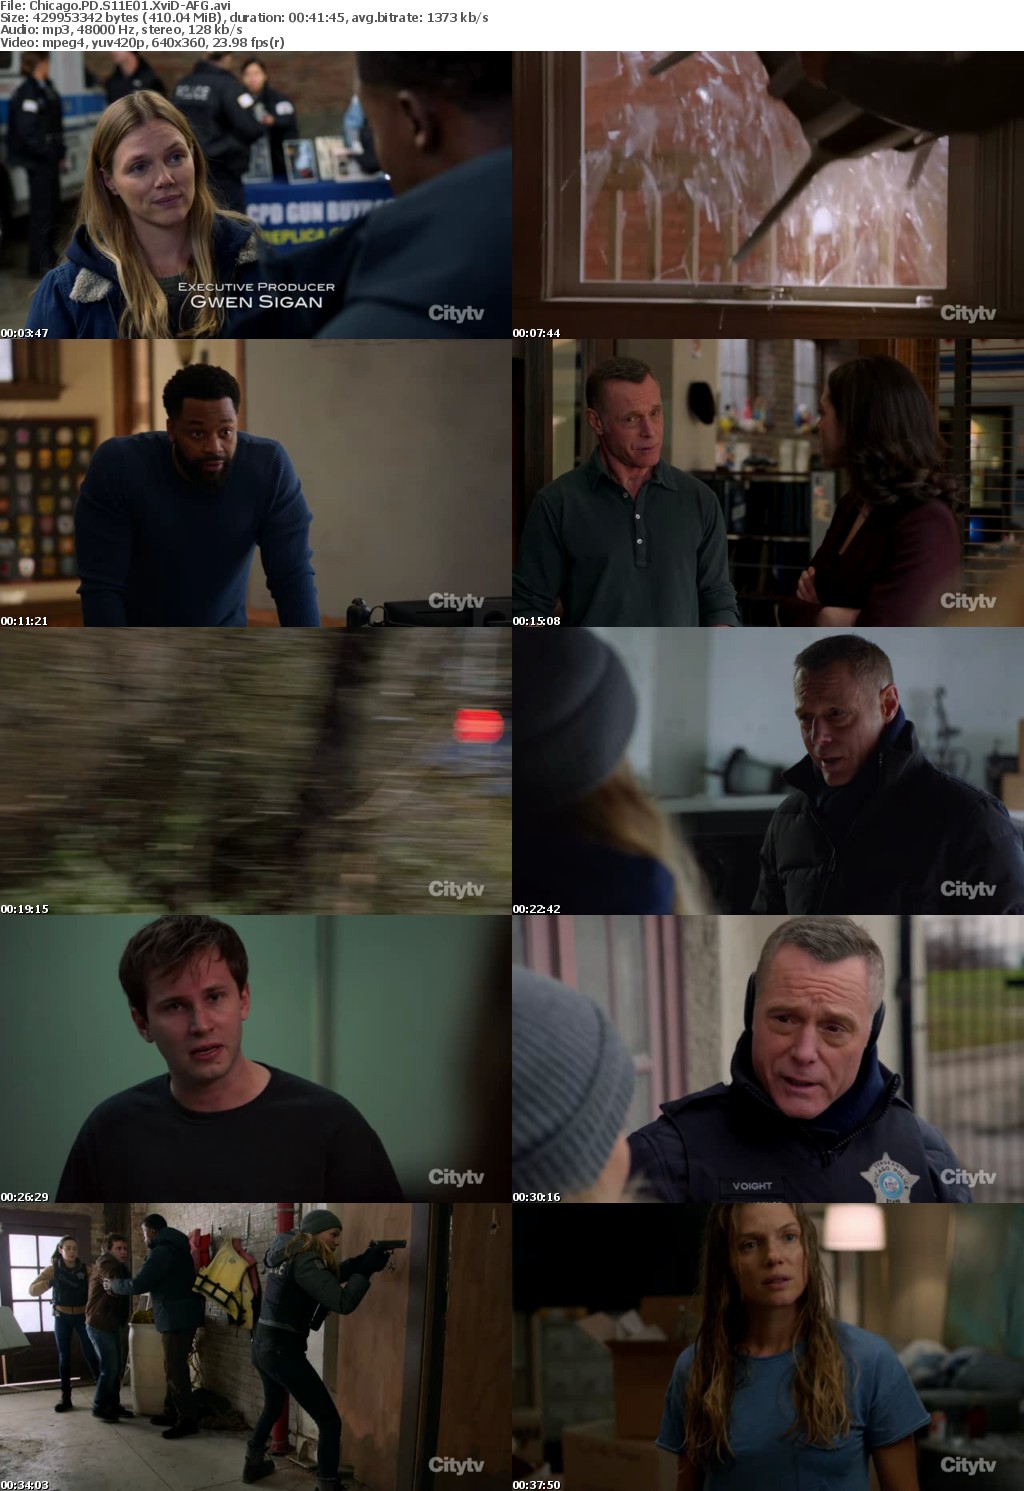 Chicago PD S11E01 XviD-AFG